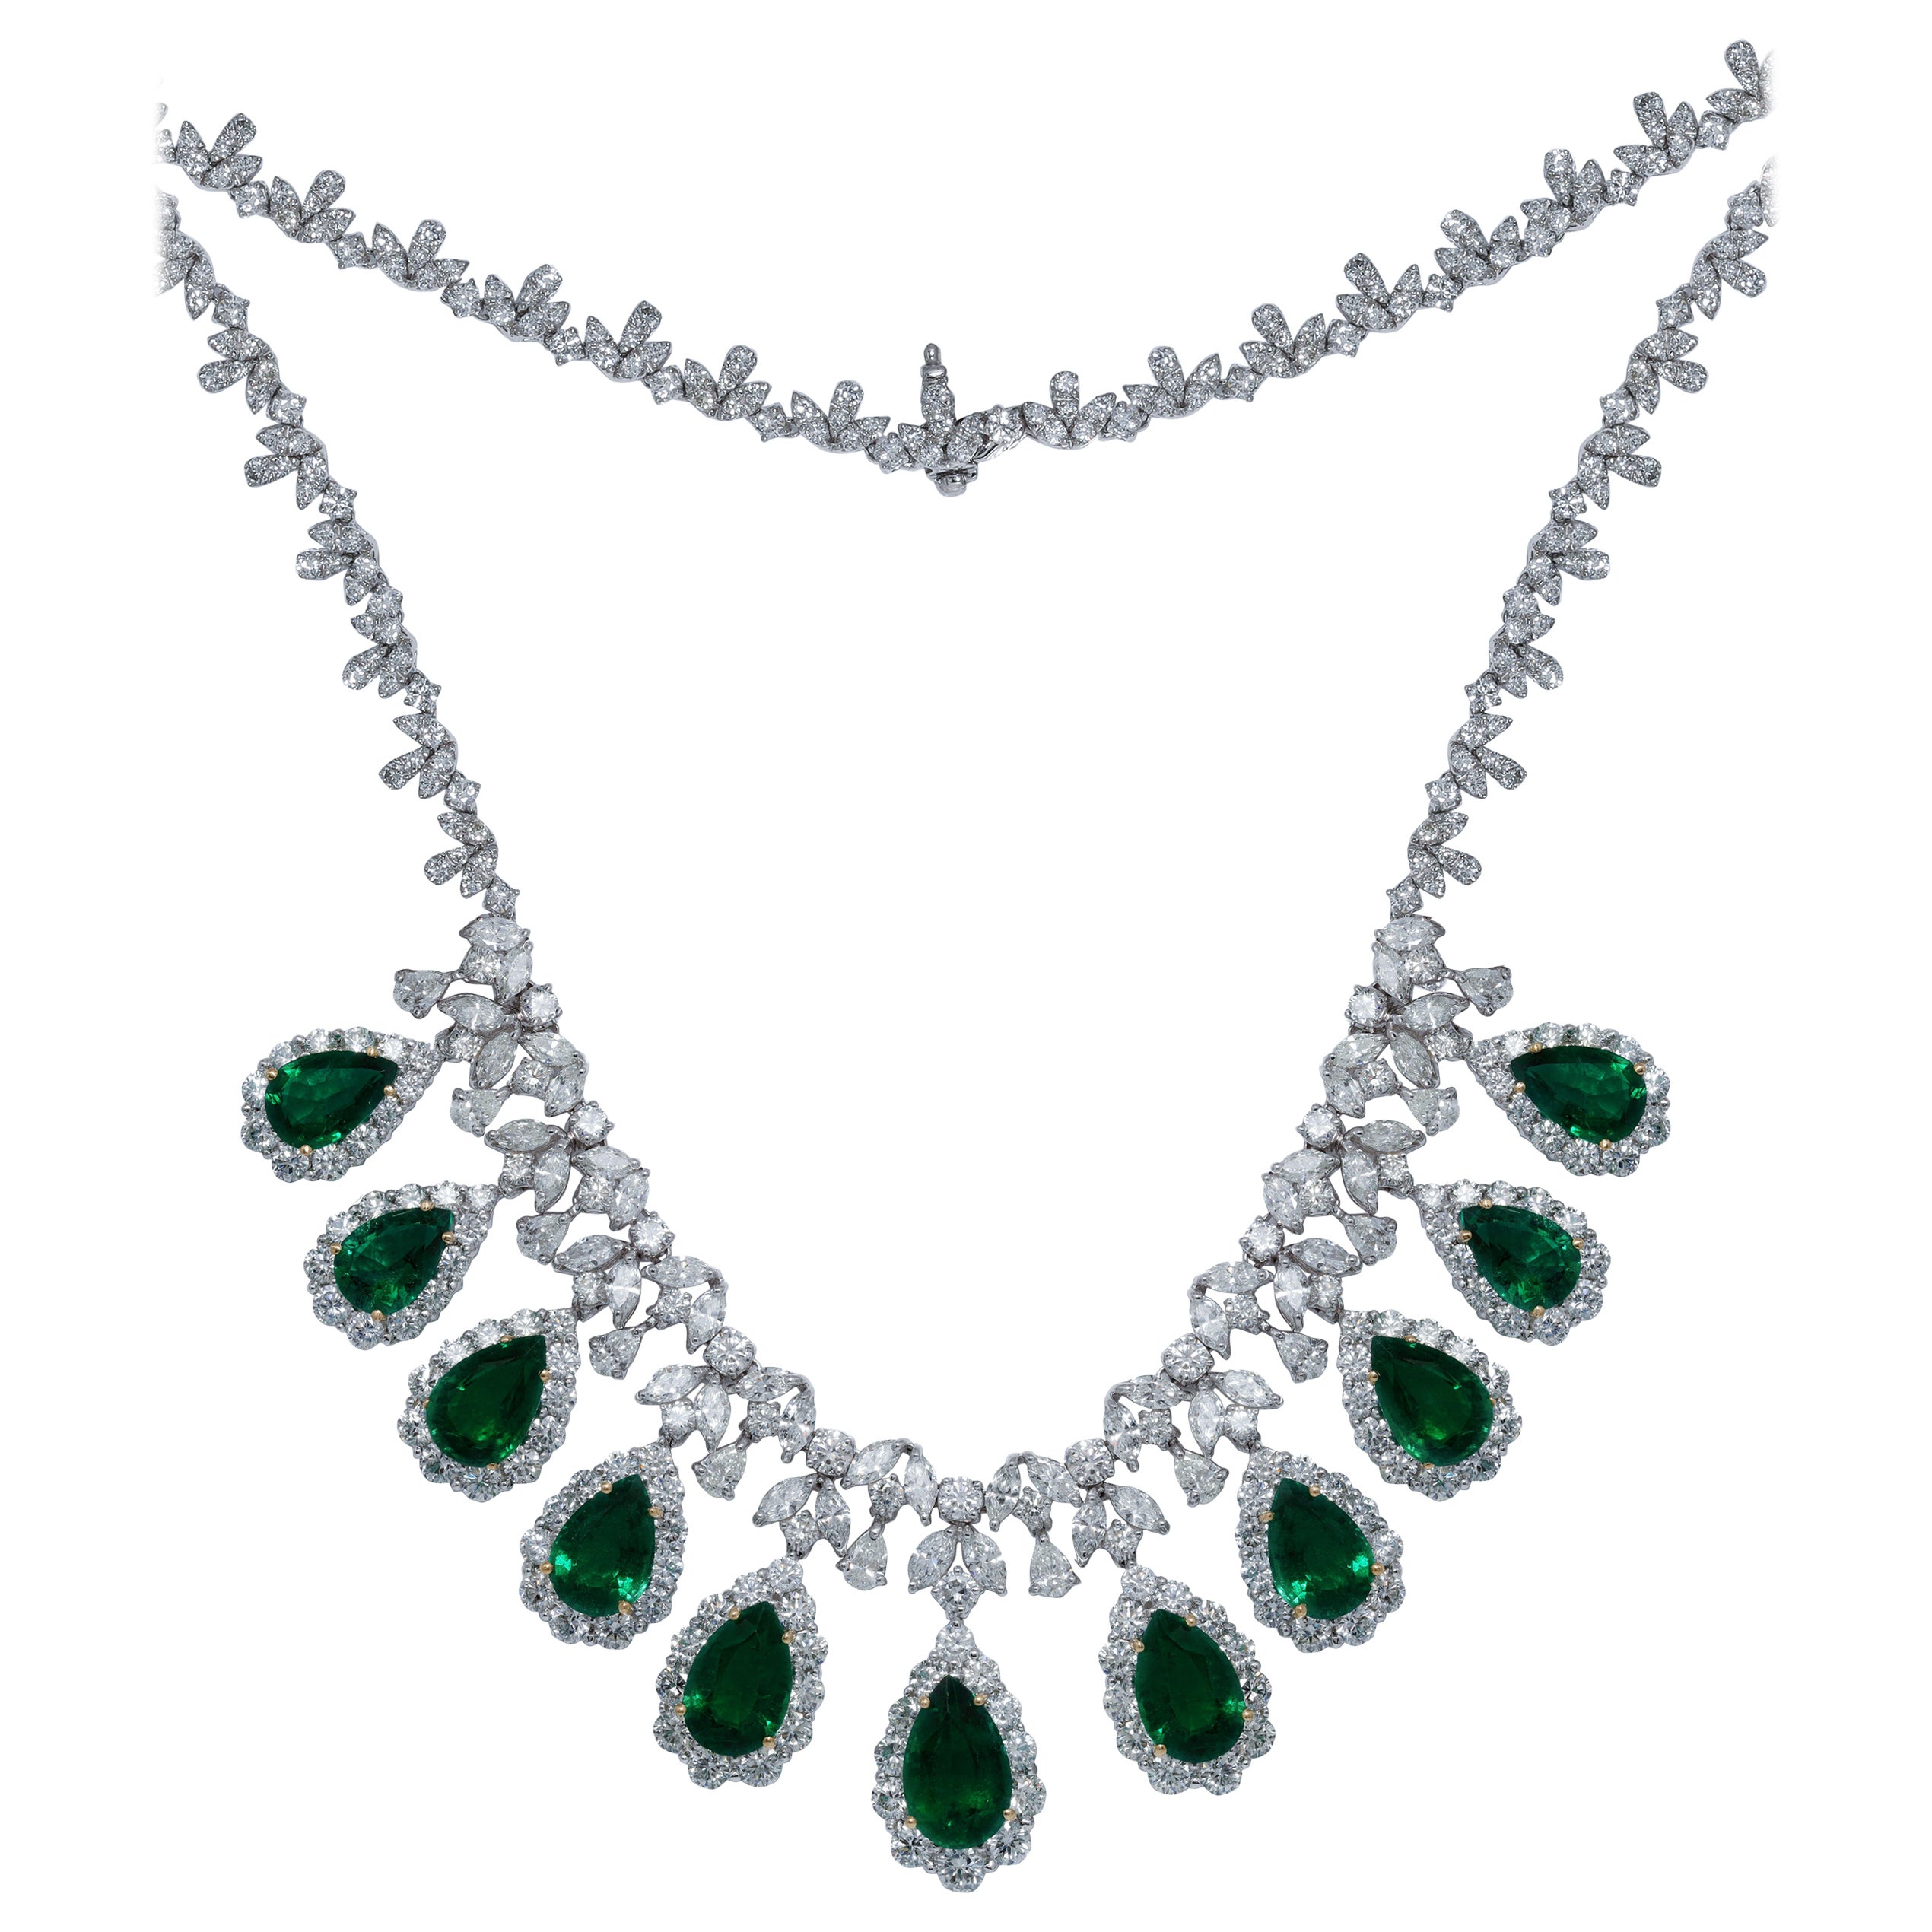 Diana M. Certified 34.51 Carat Zambian Emerald and Diamond Necklace For Sale